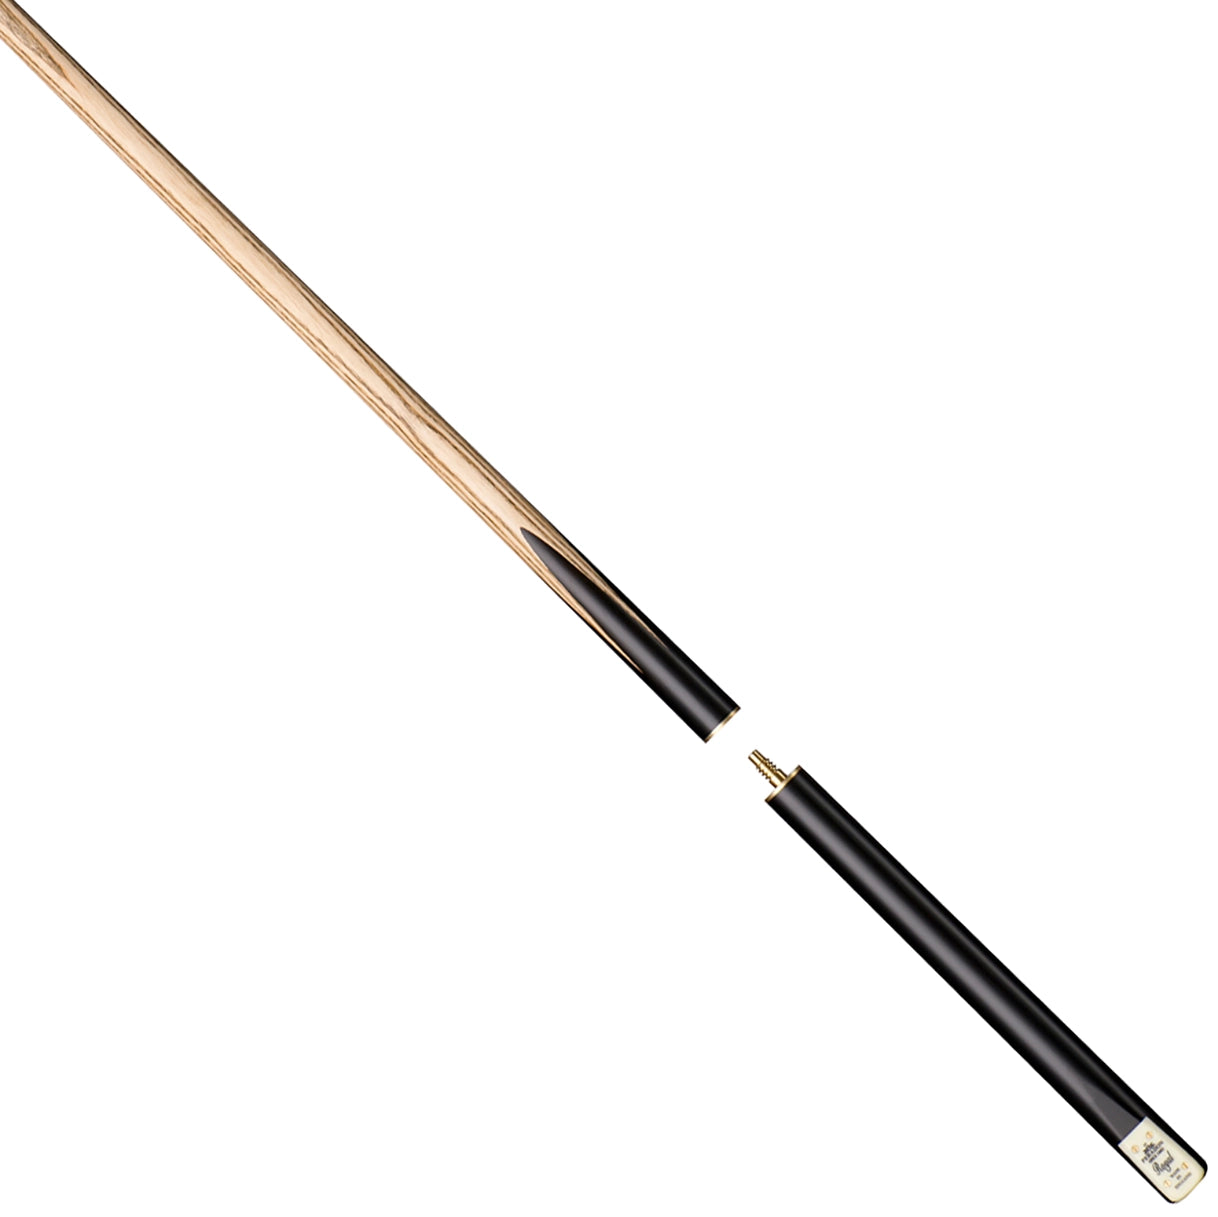 Peradon Royal 3/4 Jointed Snooker Cue. Seperated view